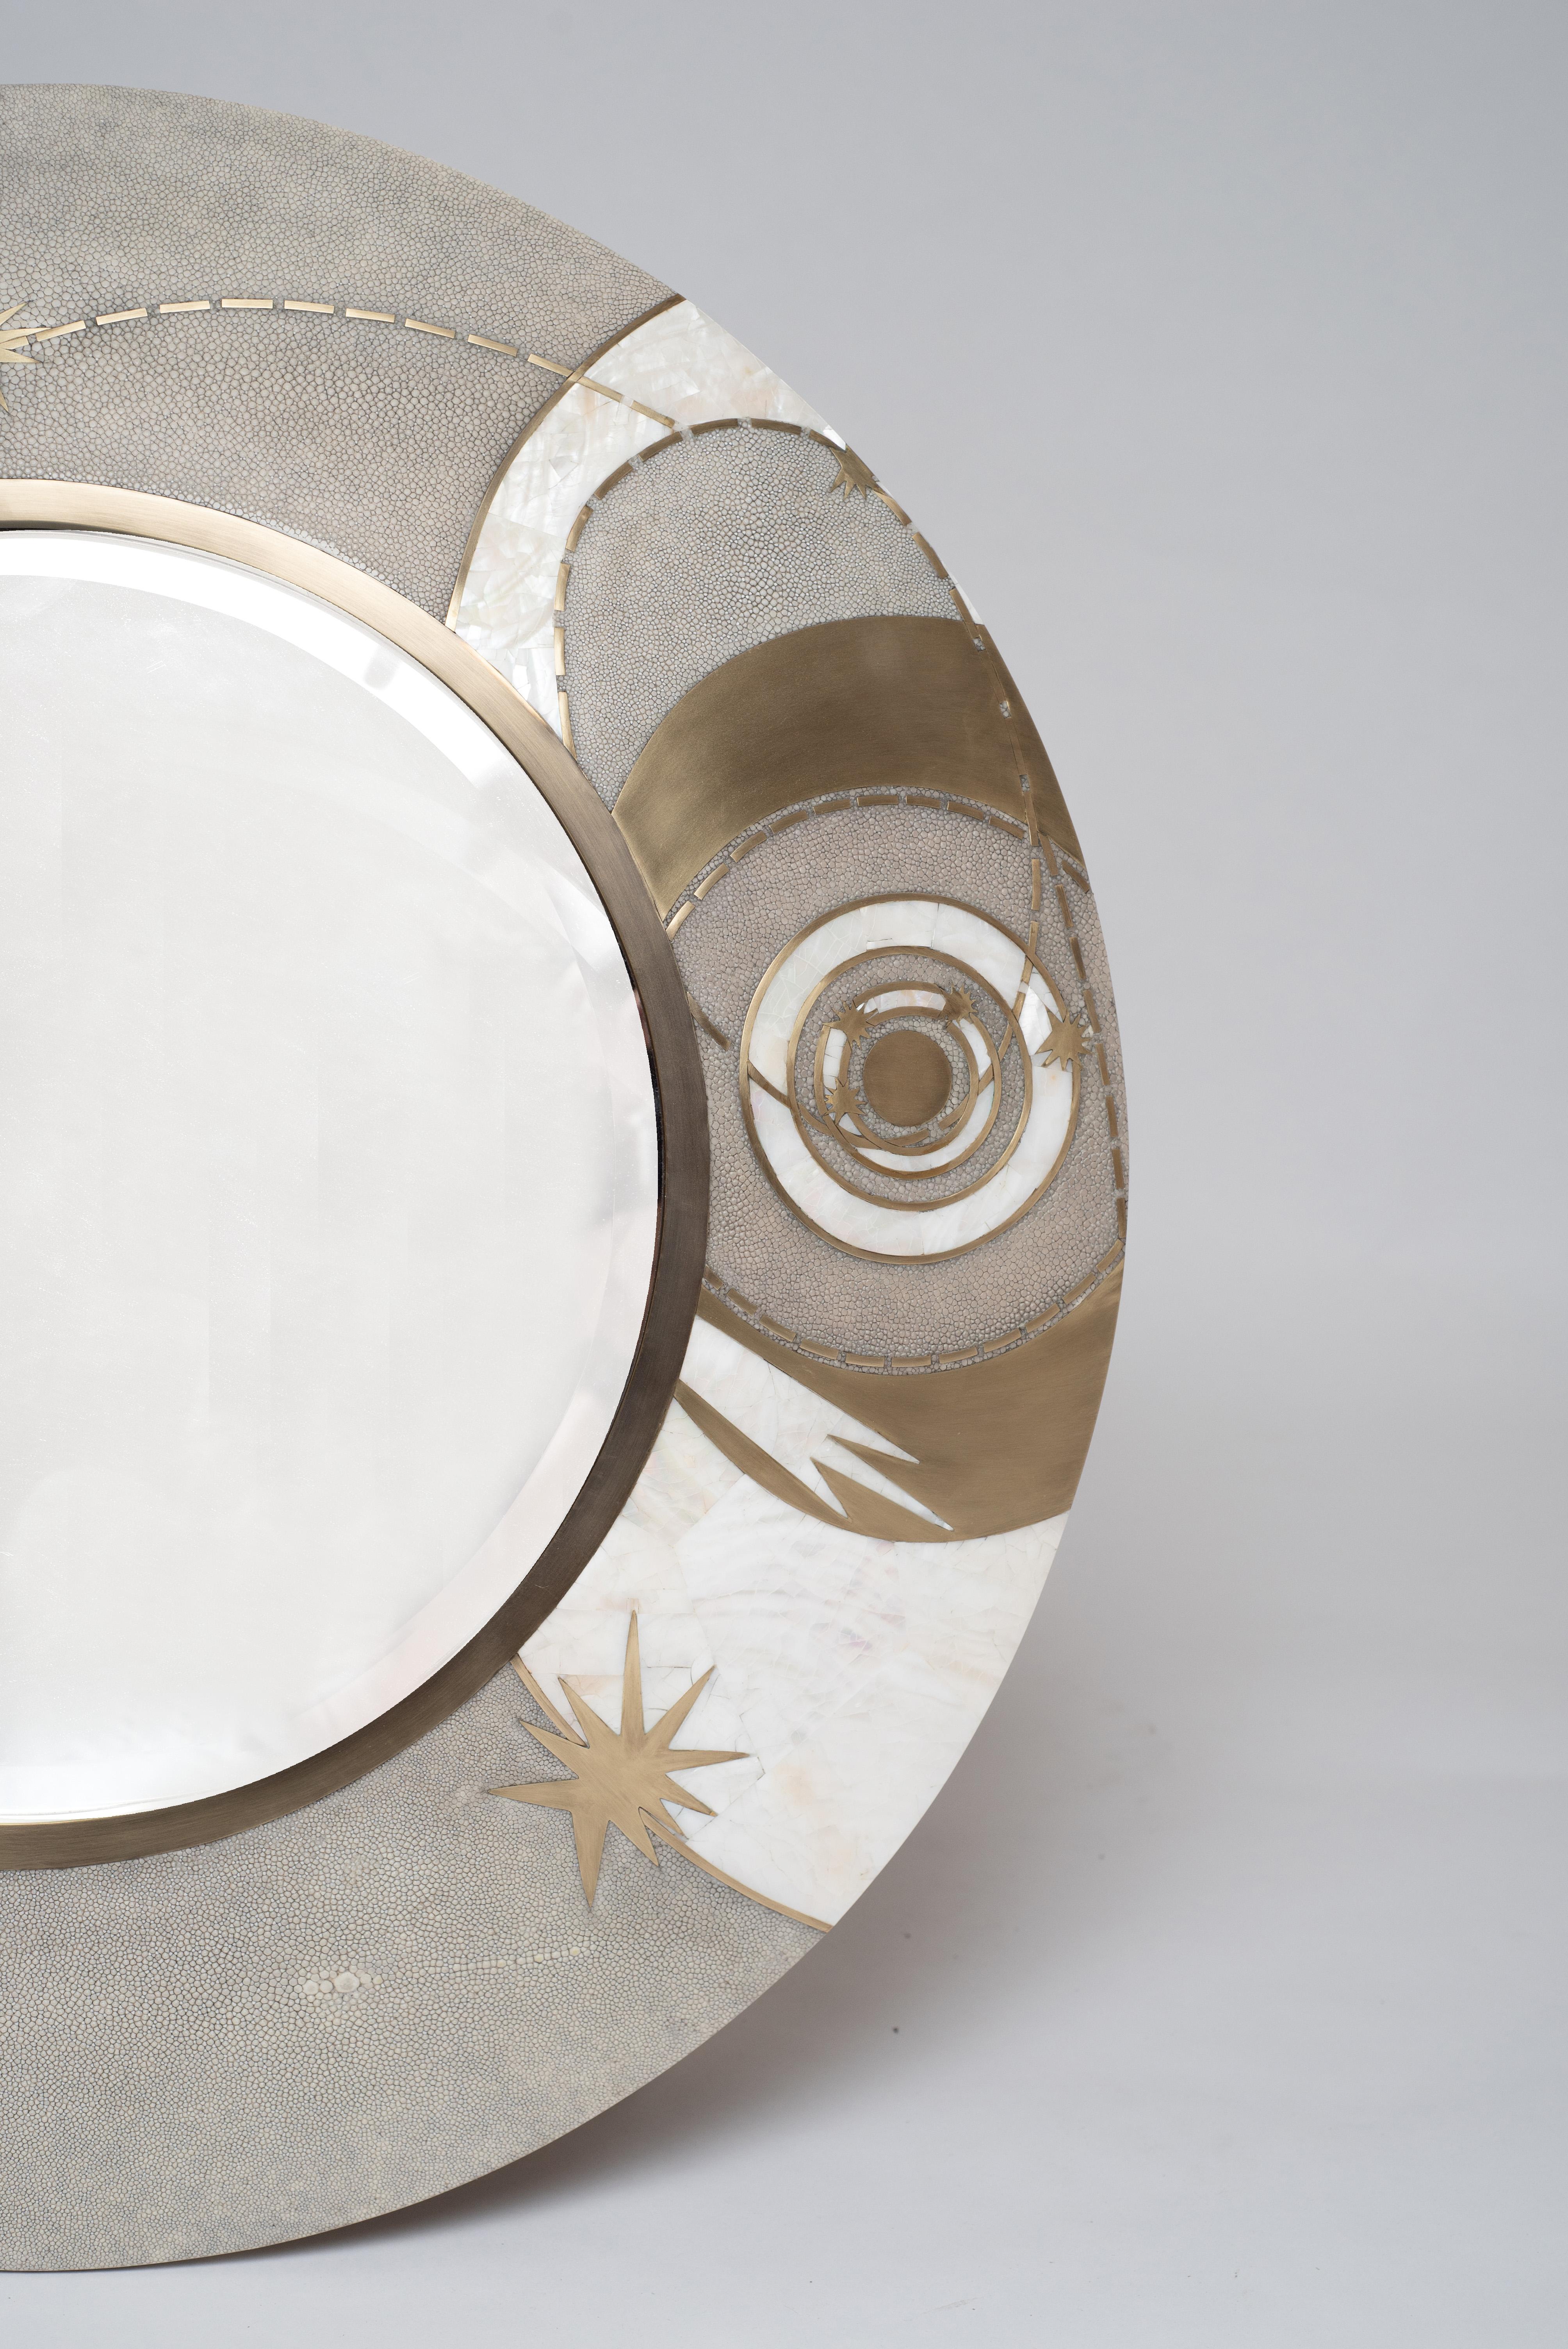 The Constellation light mirror is a statement piece with it’s celestial inspired roots. The mirror can be hung in 3 different ways. Available in a larger size and black finish (image at end of the slide). The shagreen is hand-dyed by artisans and